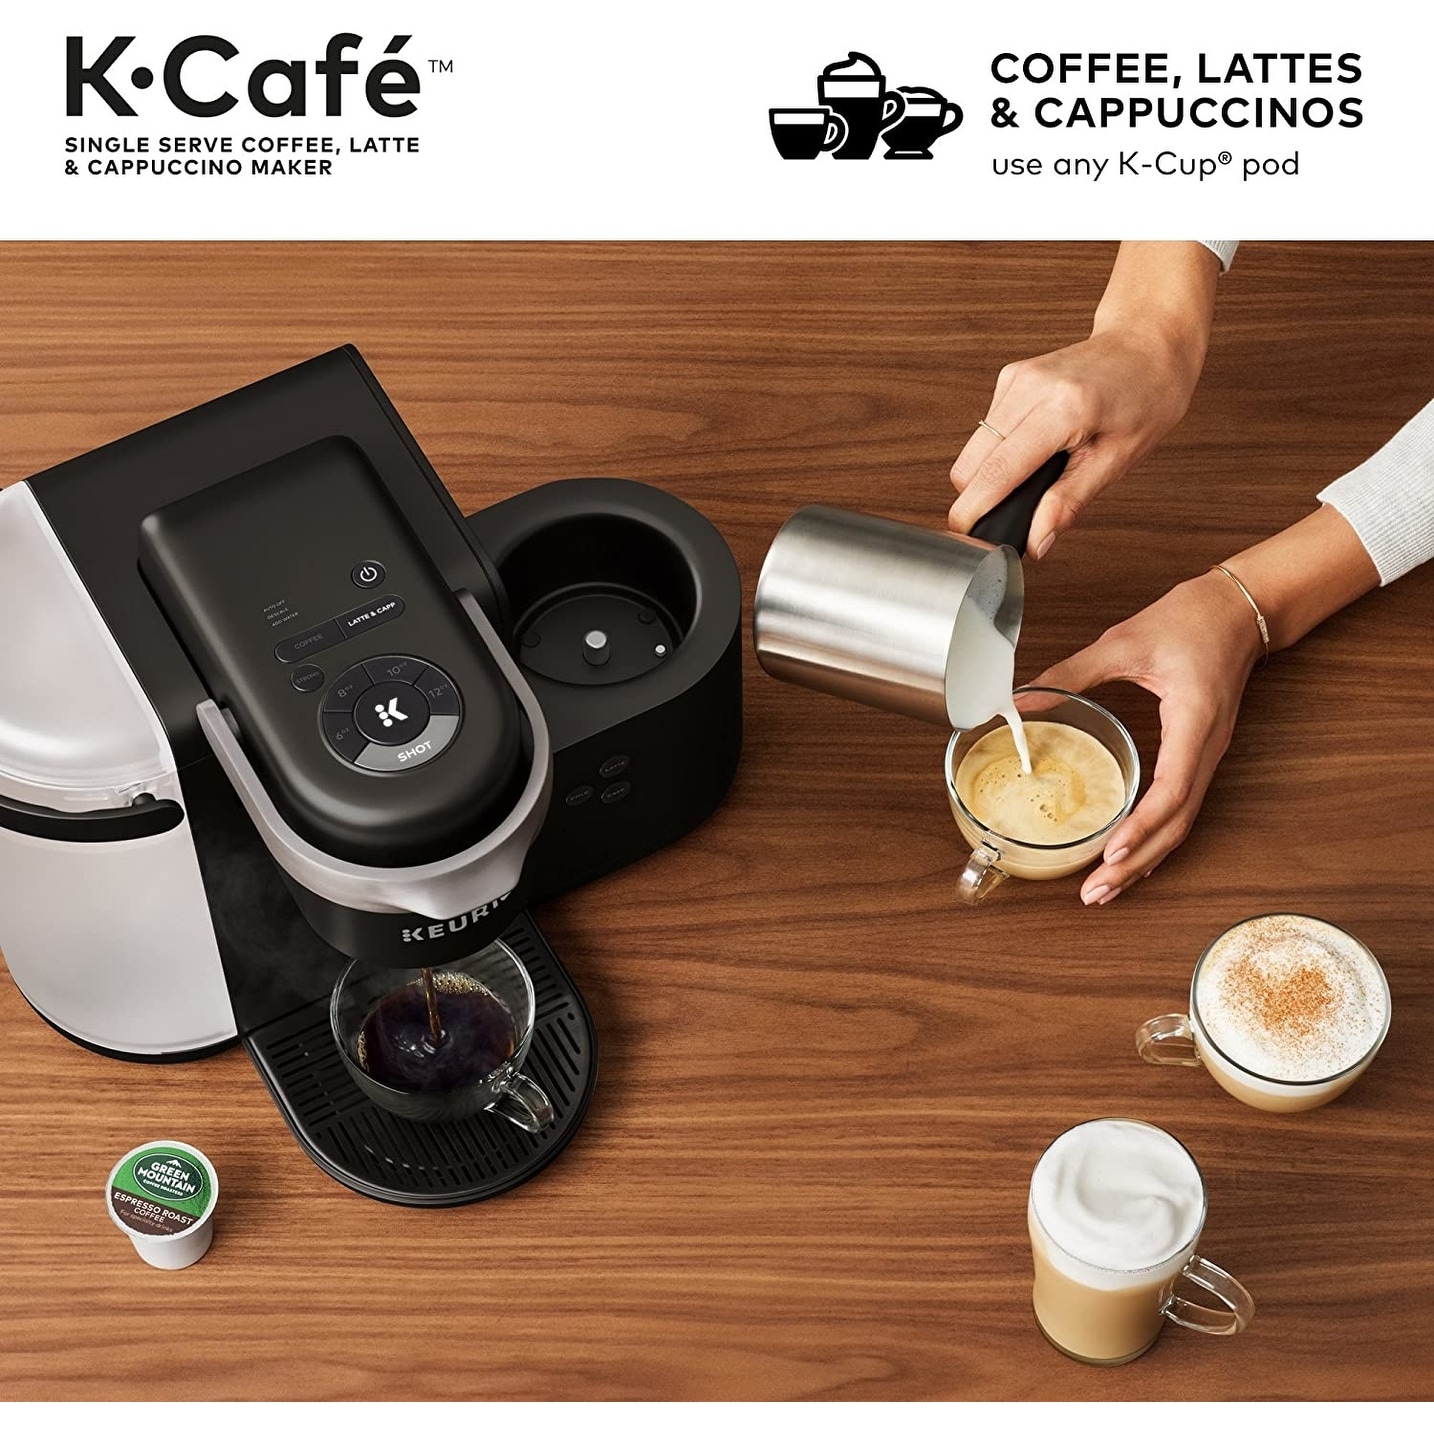 https://ak1.ostkcdn.com/images/products/is/images/direct/e187e283b5a03c0fe3747d251e64cd576c3e69ad/Keurig-K-Cafe-Single-Serve-K-Cup-Coffee-Maker%2C-Latte-Maker-and-Cappuccino-Maker%2C-With-Frother%2C-Dark-Charcoal.jpg